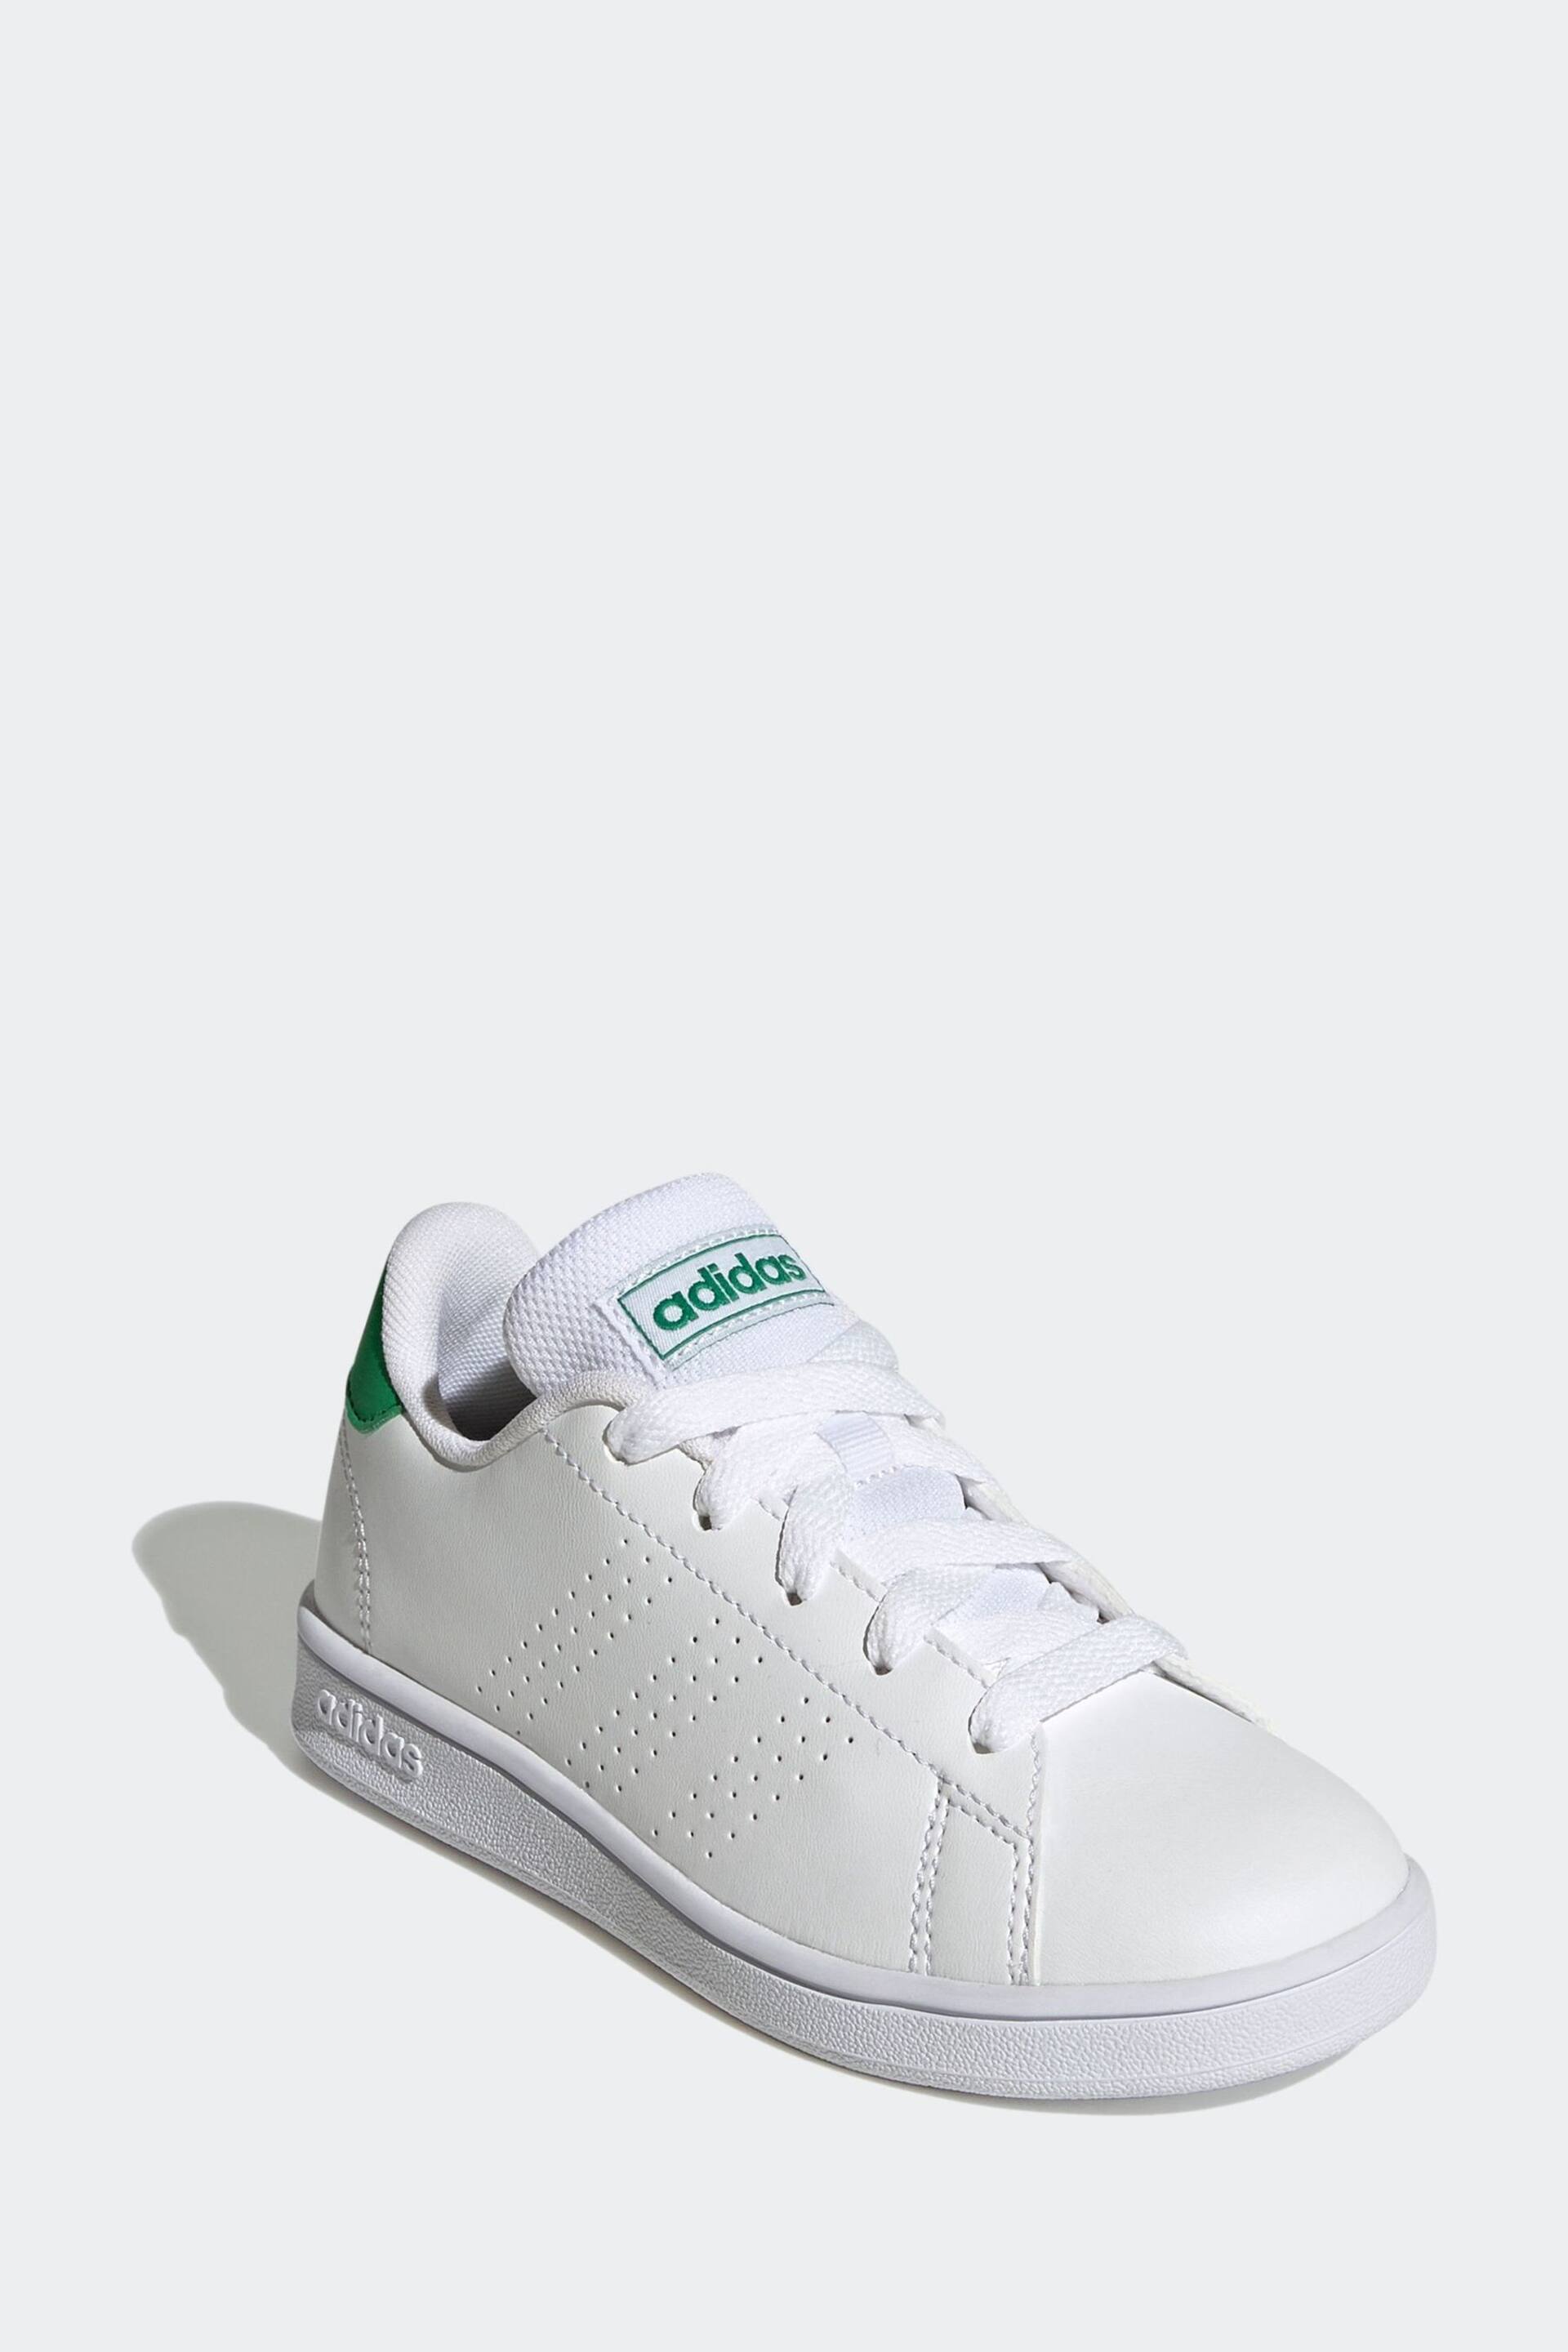 adidas Green/White Sportswear Advantage Lifestyle Court Lace Trainers - Image 4 of 9